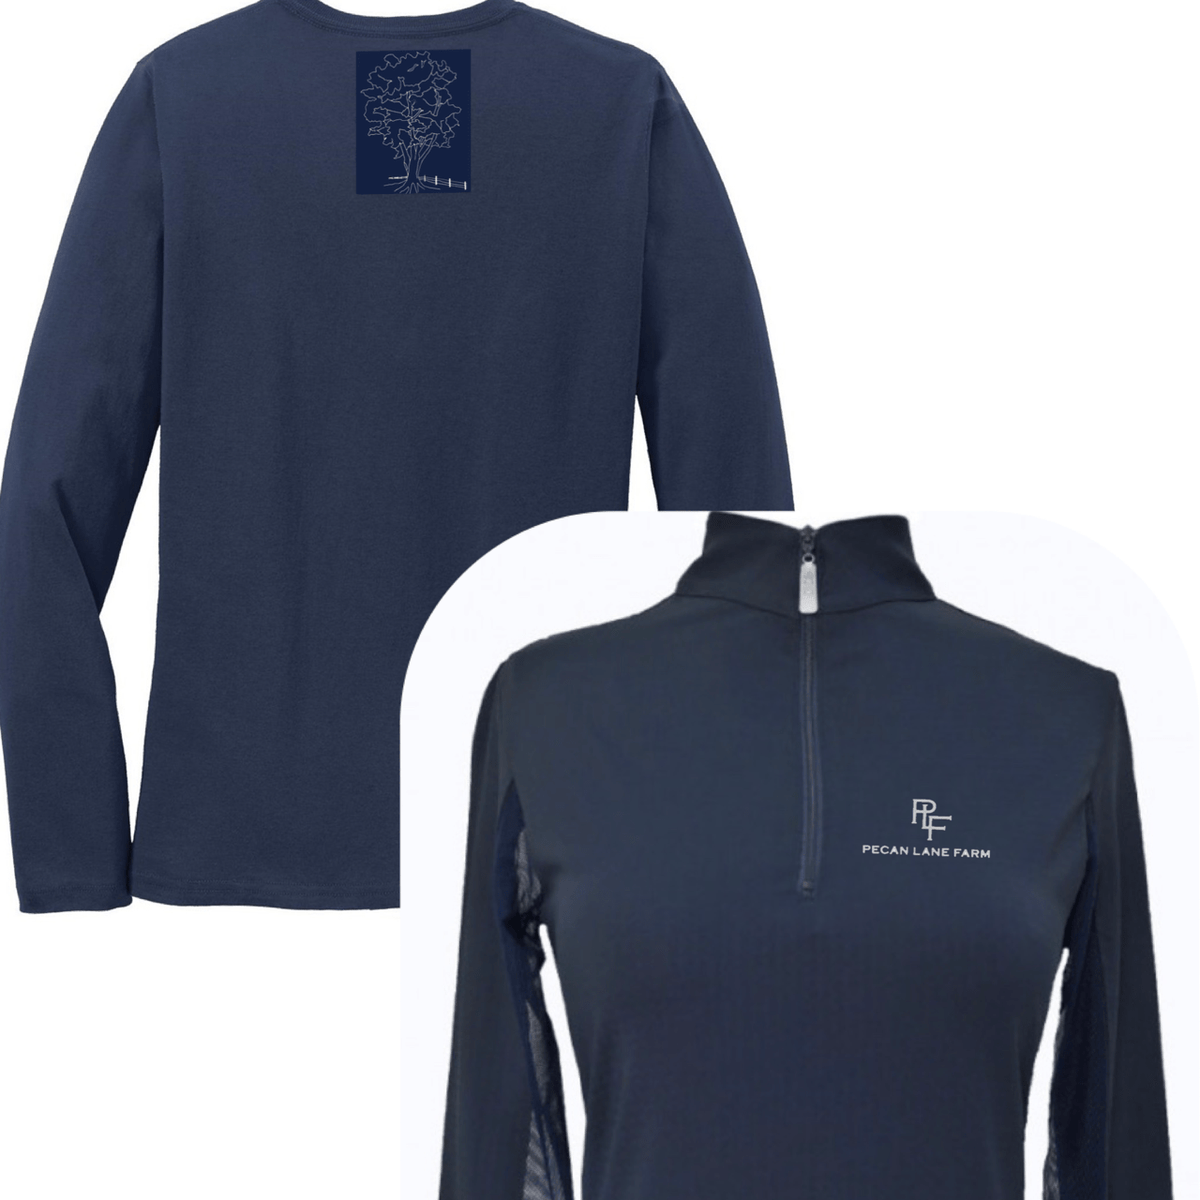 Equestrian Team Apparel Custom Team Shirts Kids Pecan Lane Farm Sun Shirt equestrian team apparel online tack store mobile tack store custom farm apparel custom show stable clothing equestrian lifestyle horse show clothing riding clothes horses equestrian tack store